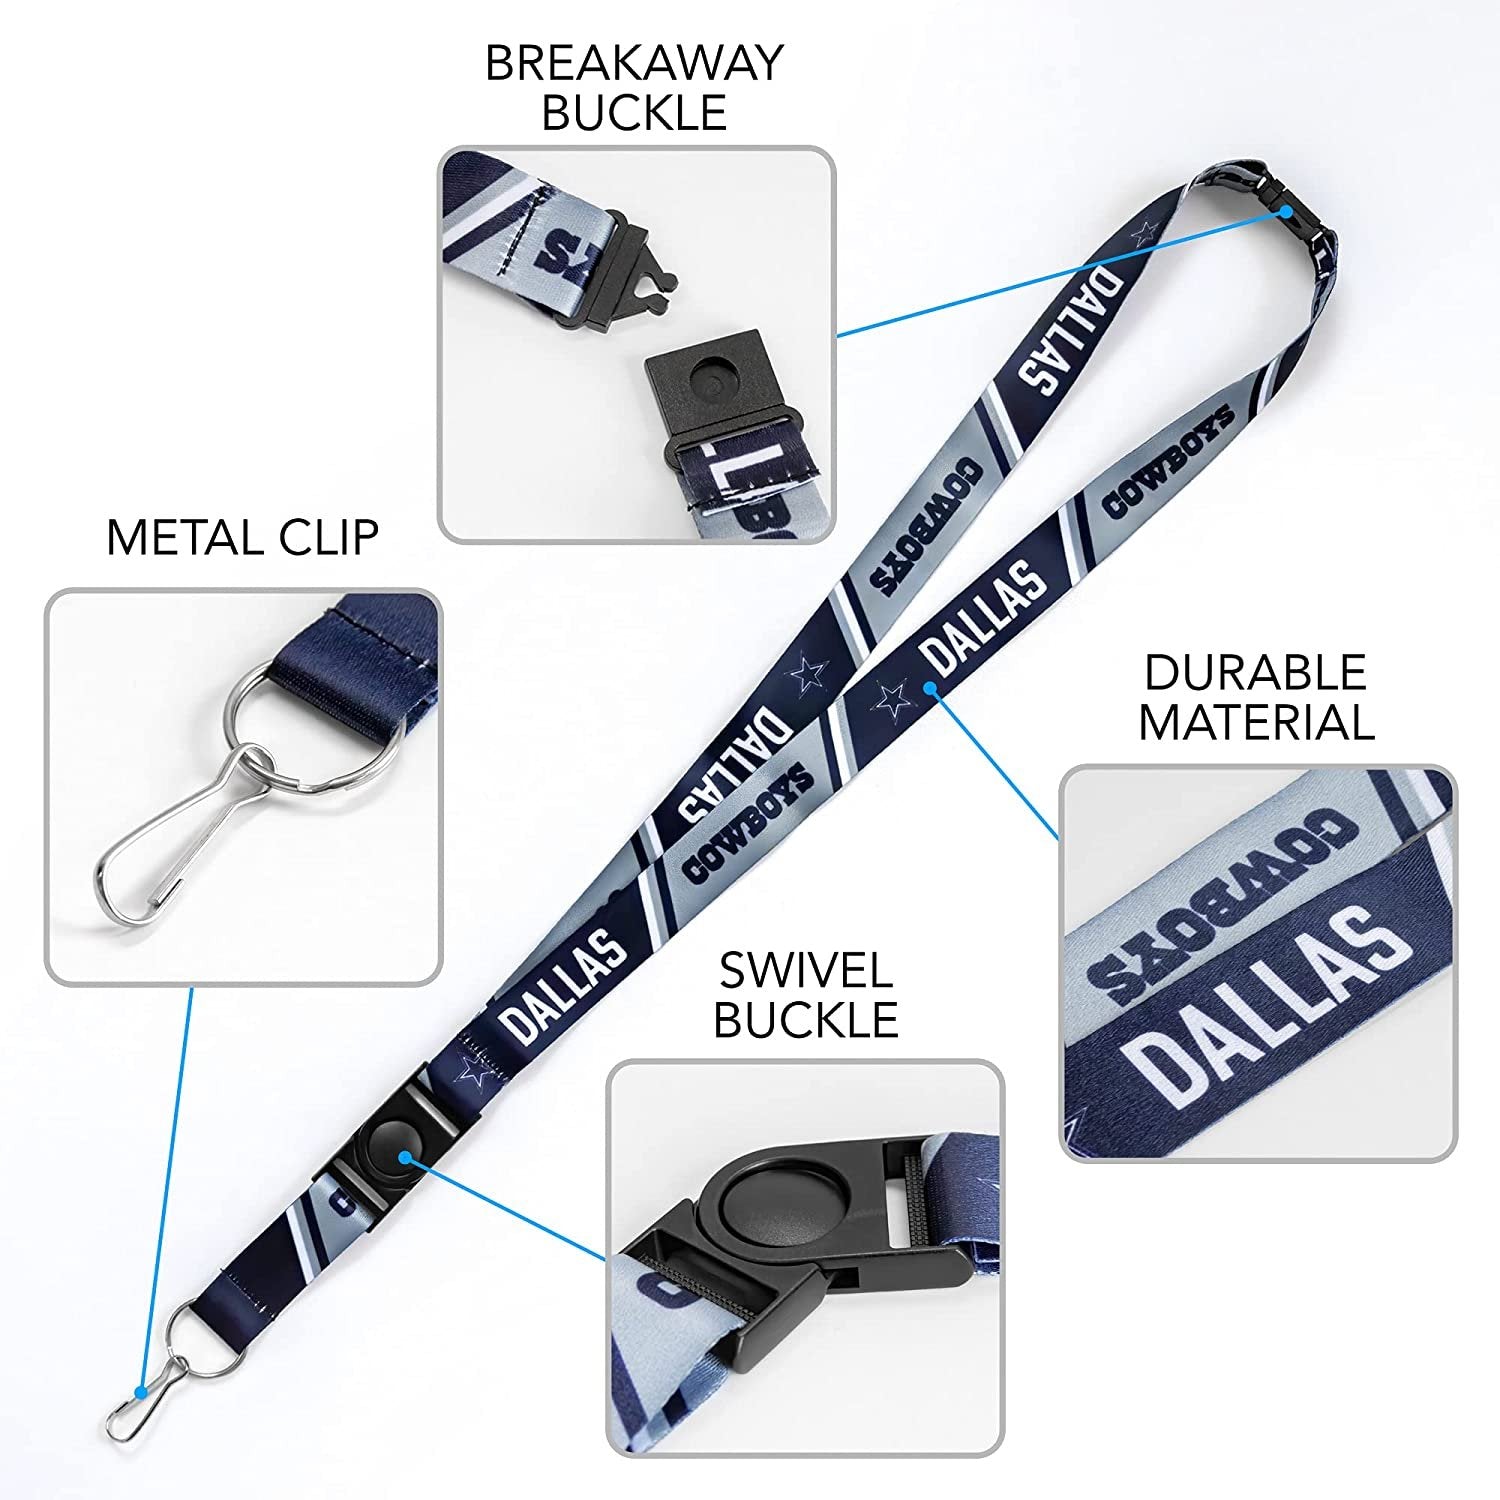 University of Memphis Tigers Lanyard Keychain Double Sided 18 Inch Button Clip Safety Breakaway